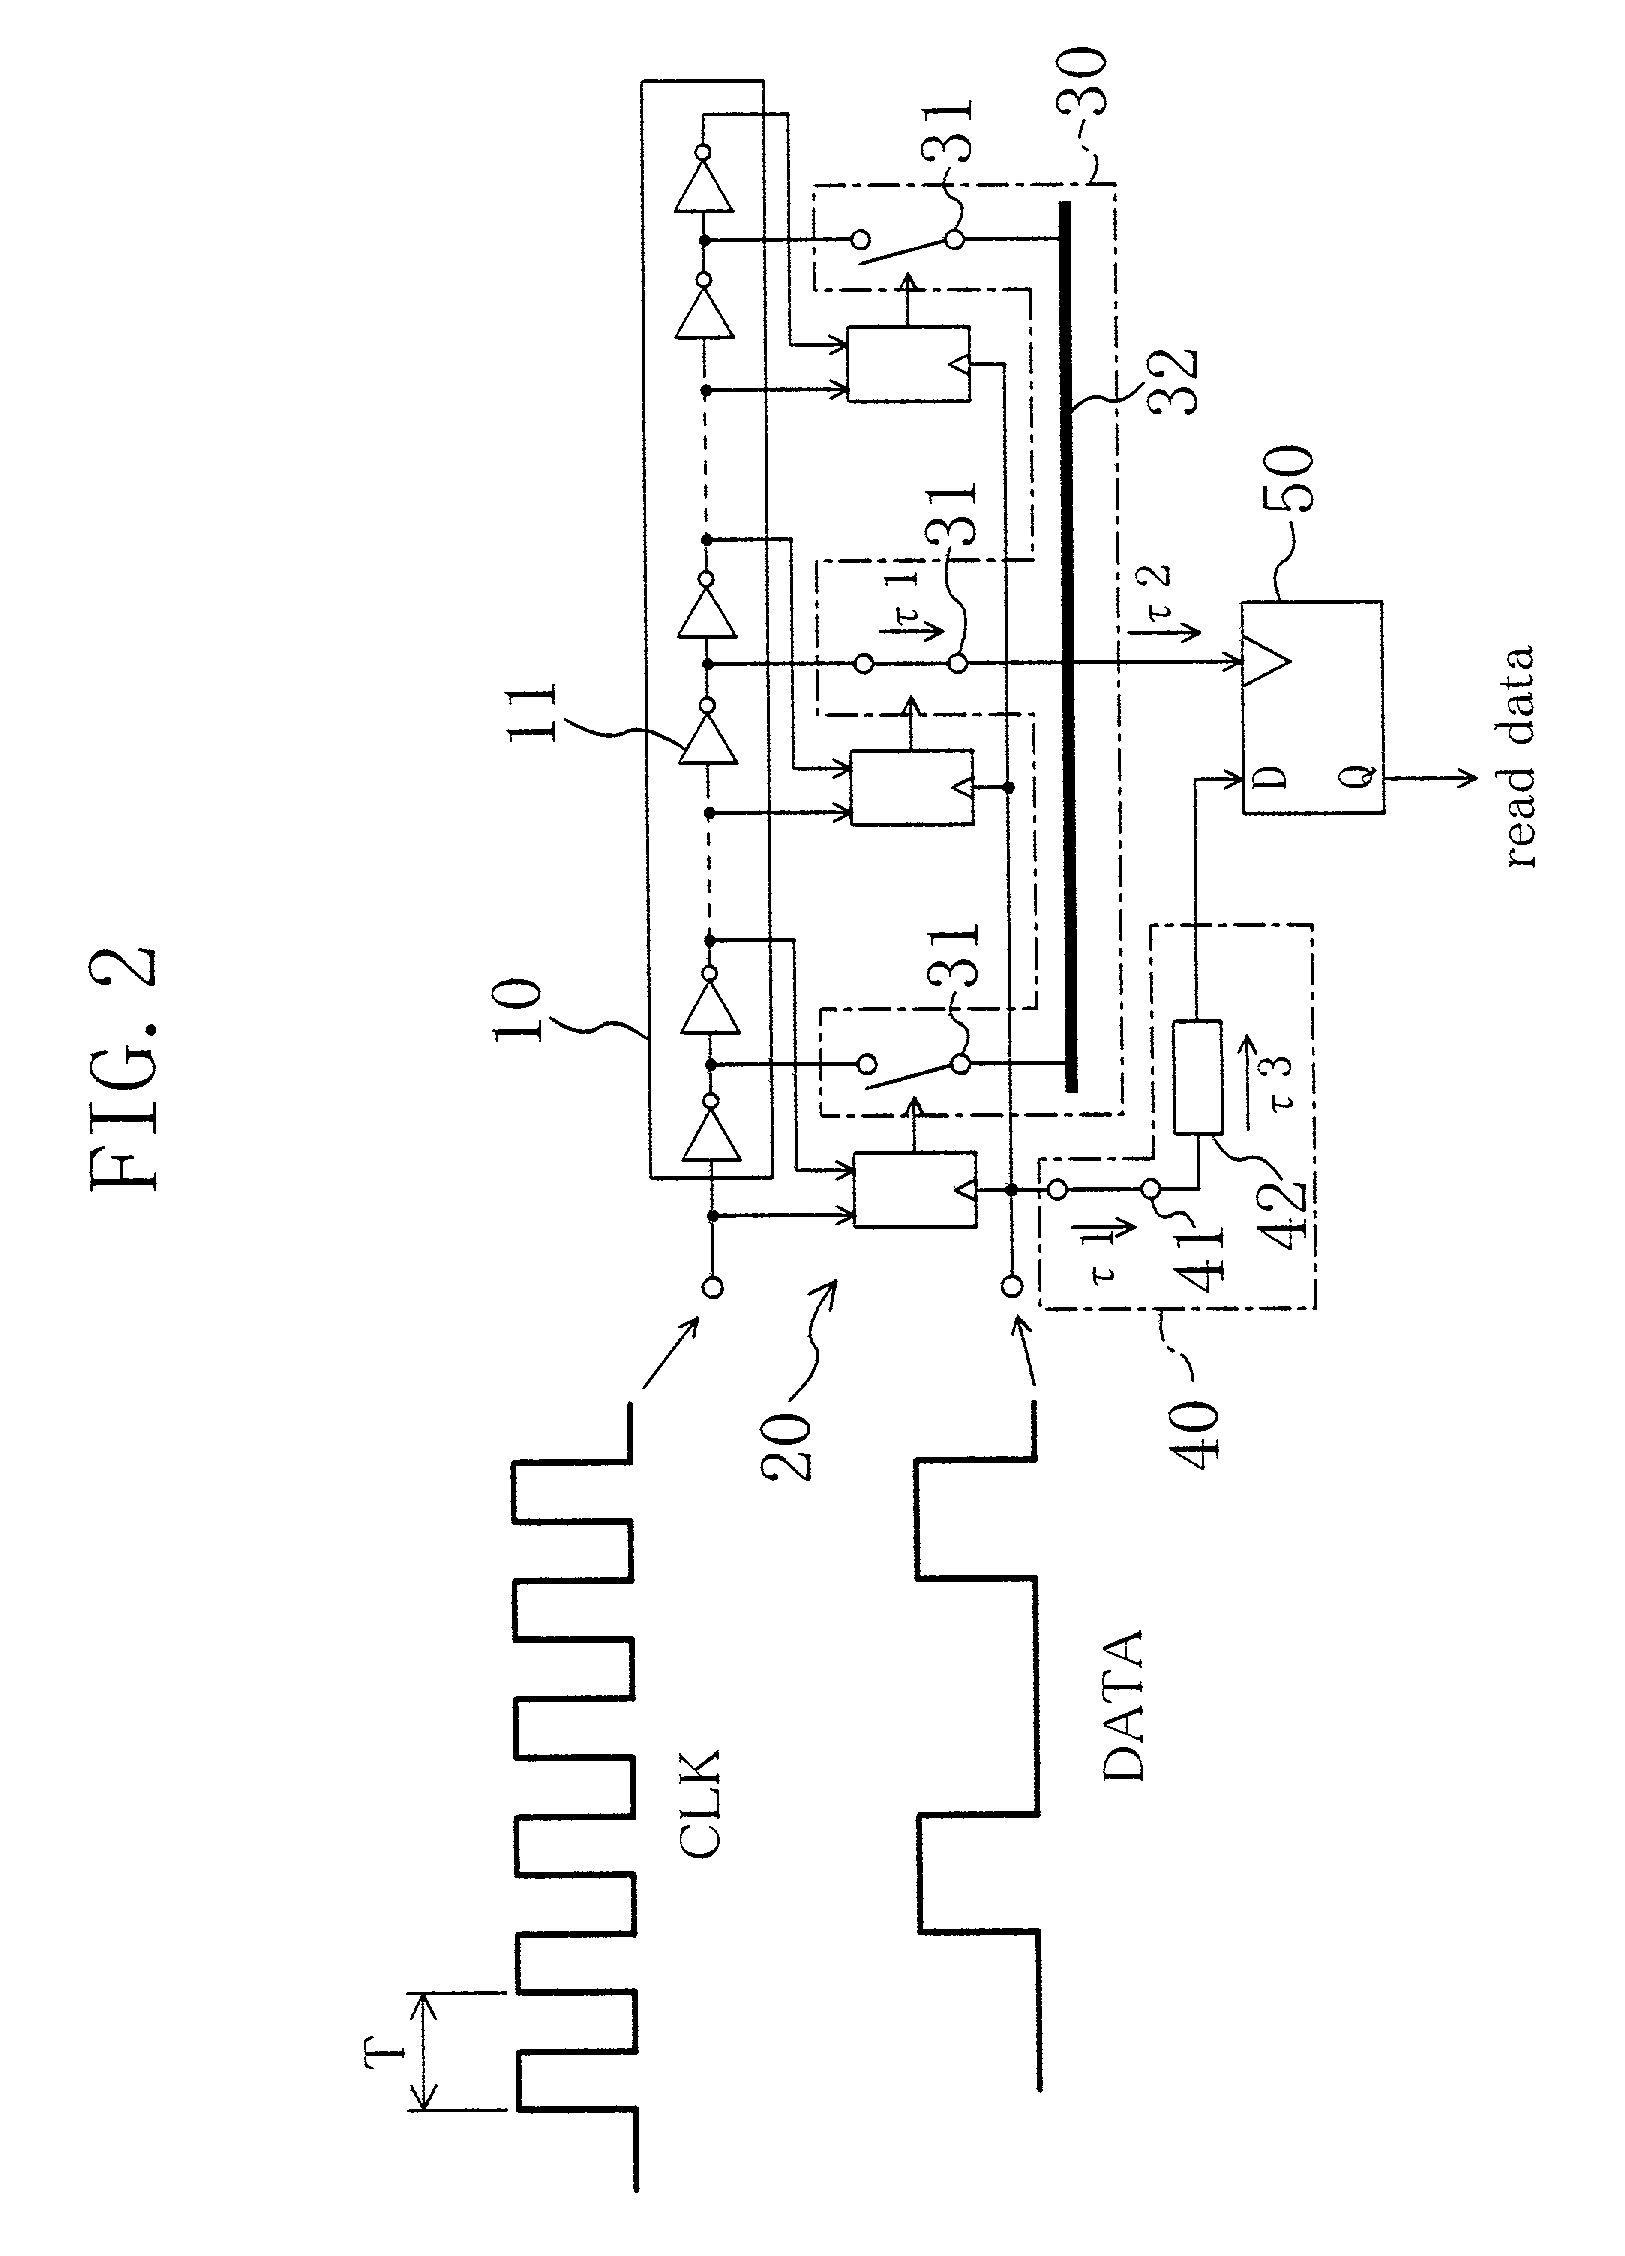 Circuit and system for extracting data